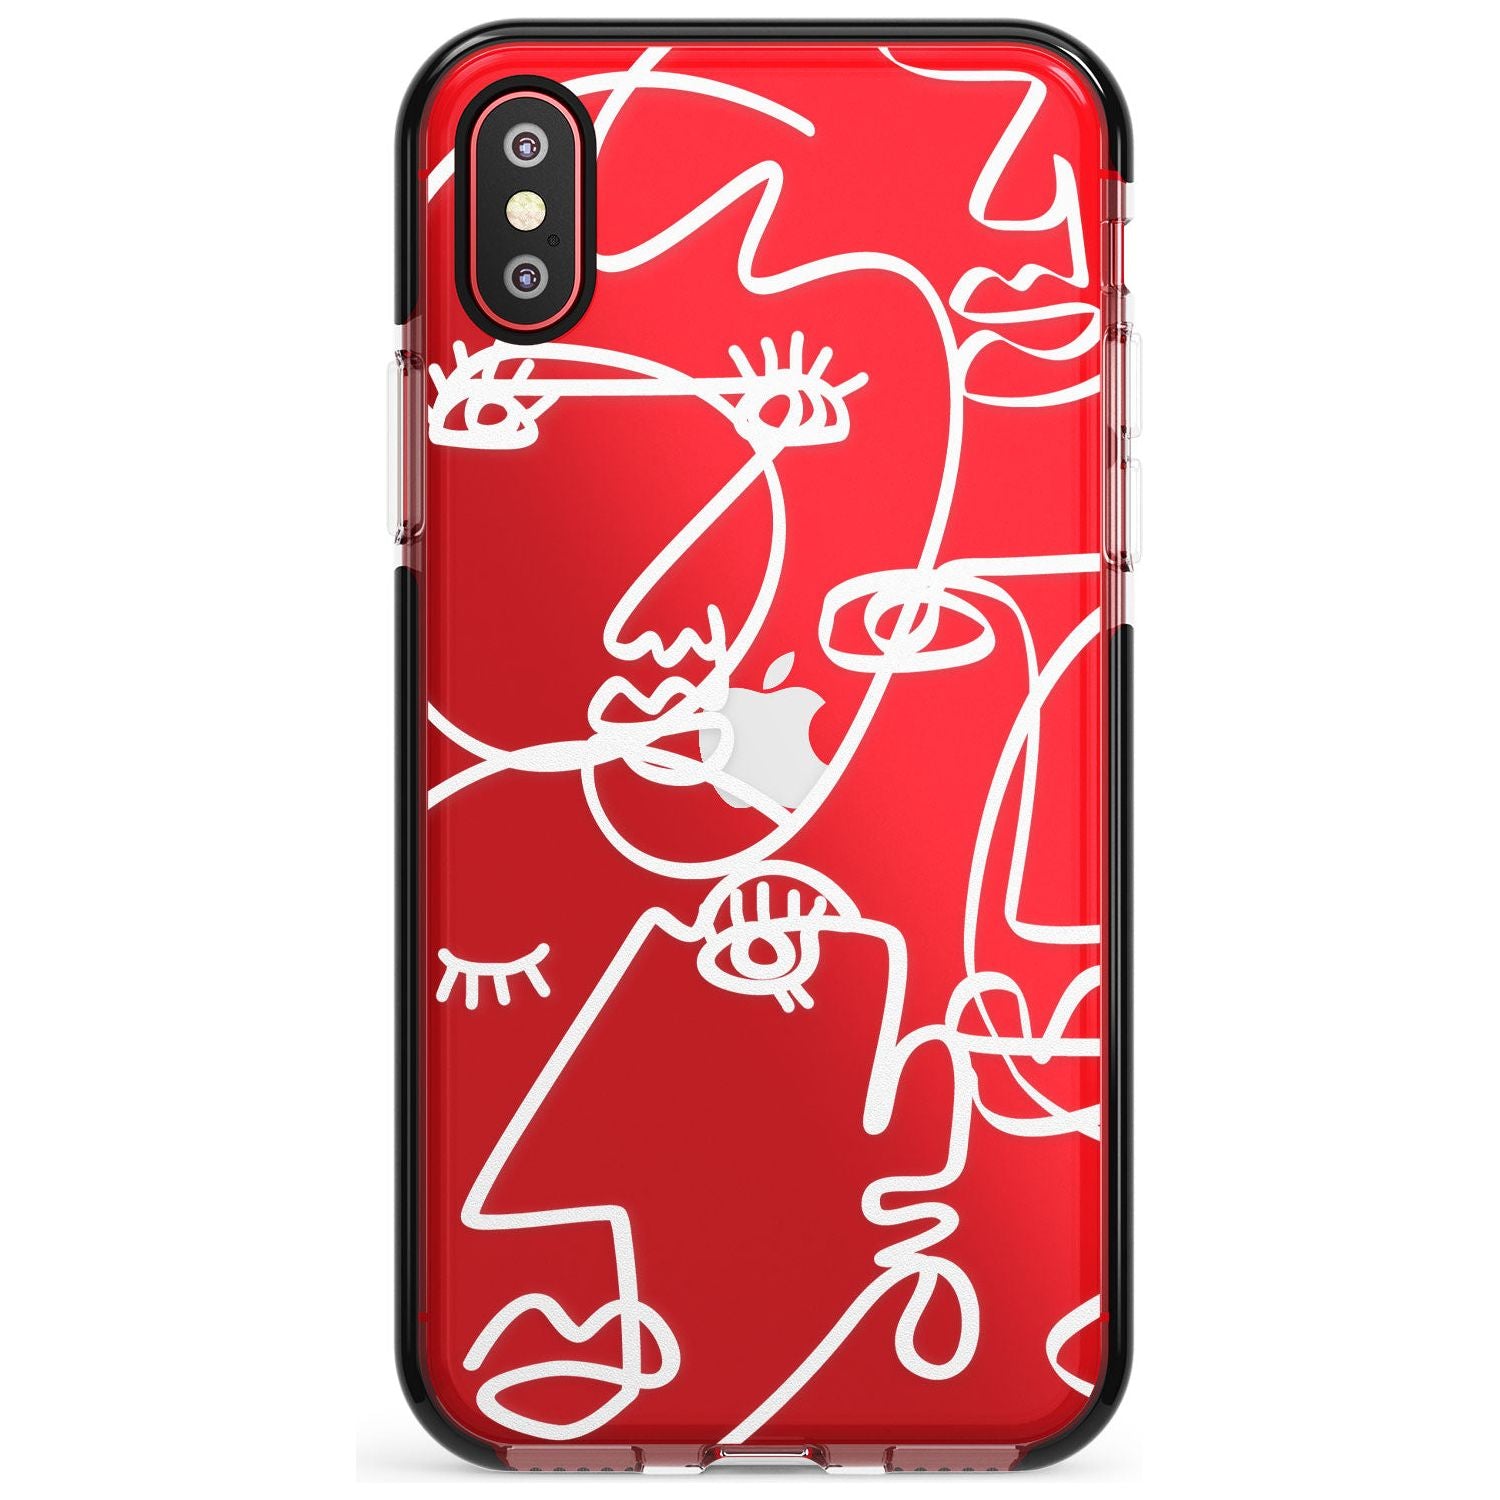 Continuous Line Faces: White on Clear Pink Fade Impact Phone Case for iPhone X XS Max XR